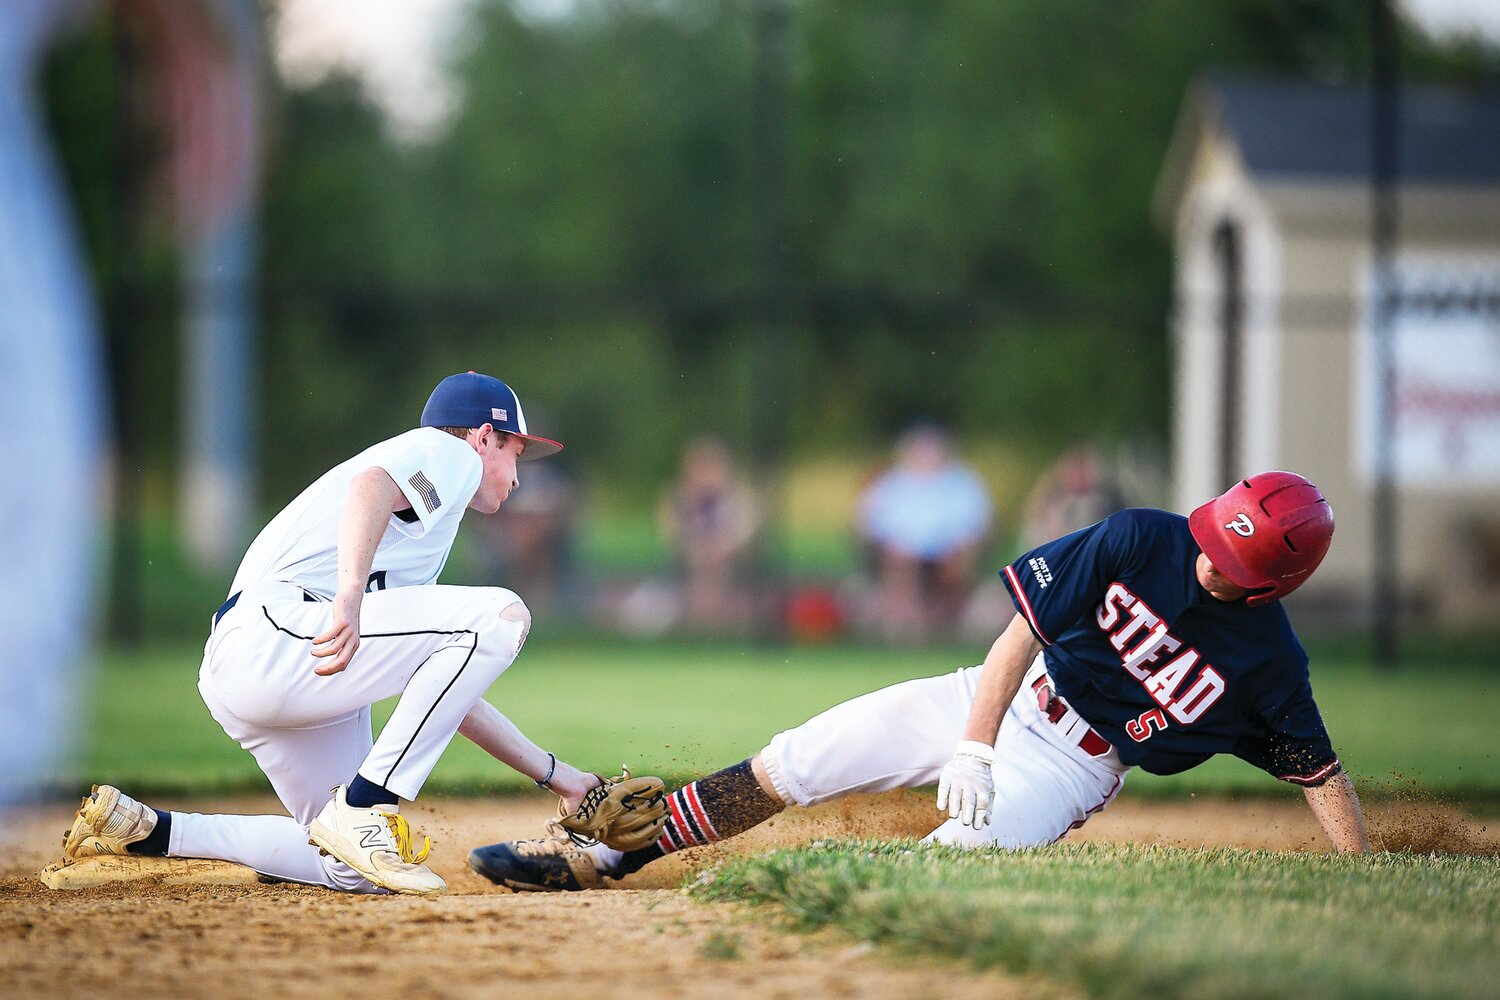 Doylestown shortstop Will Hogenhauer tags out Plumstead’s Nate Wiseman while attempting to steal second during the fifth inning.